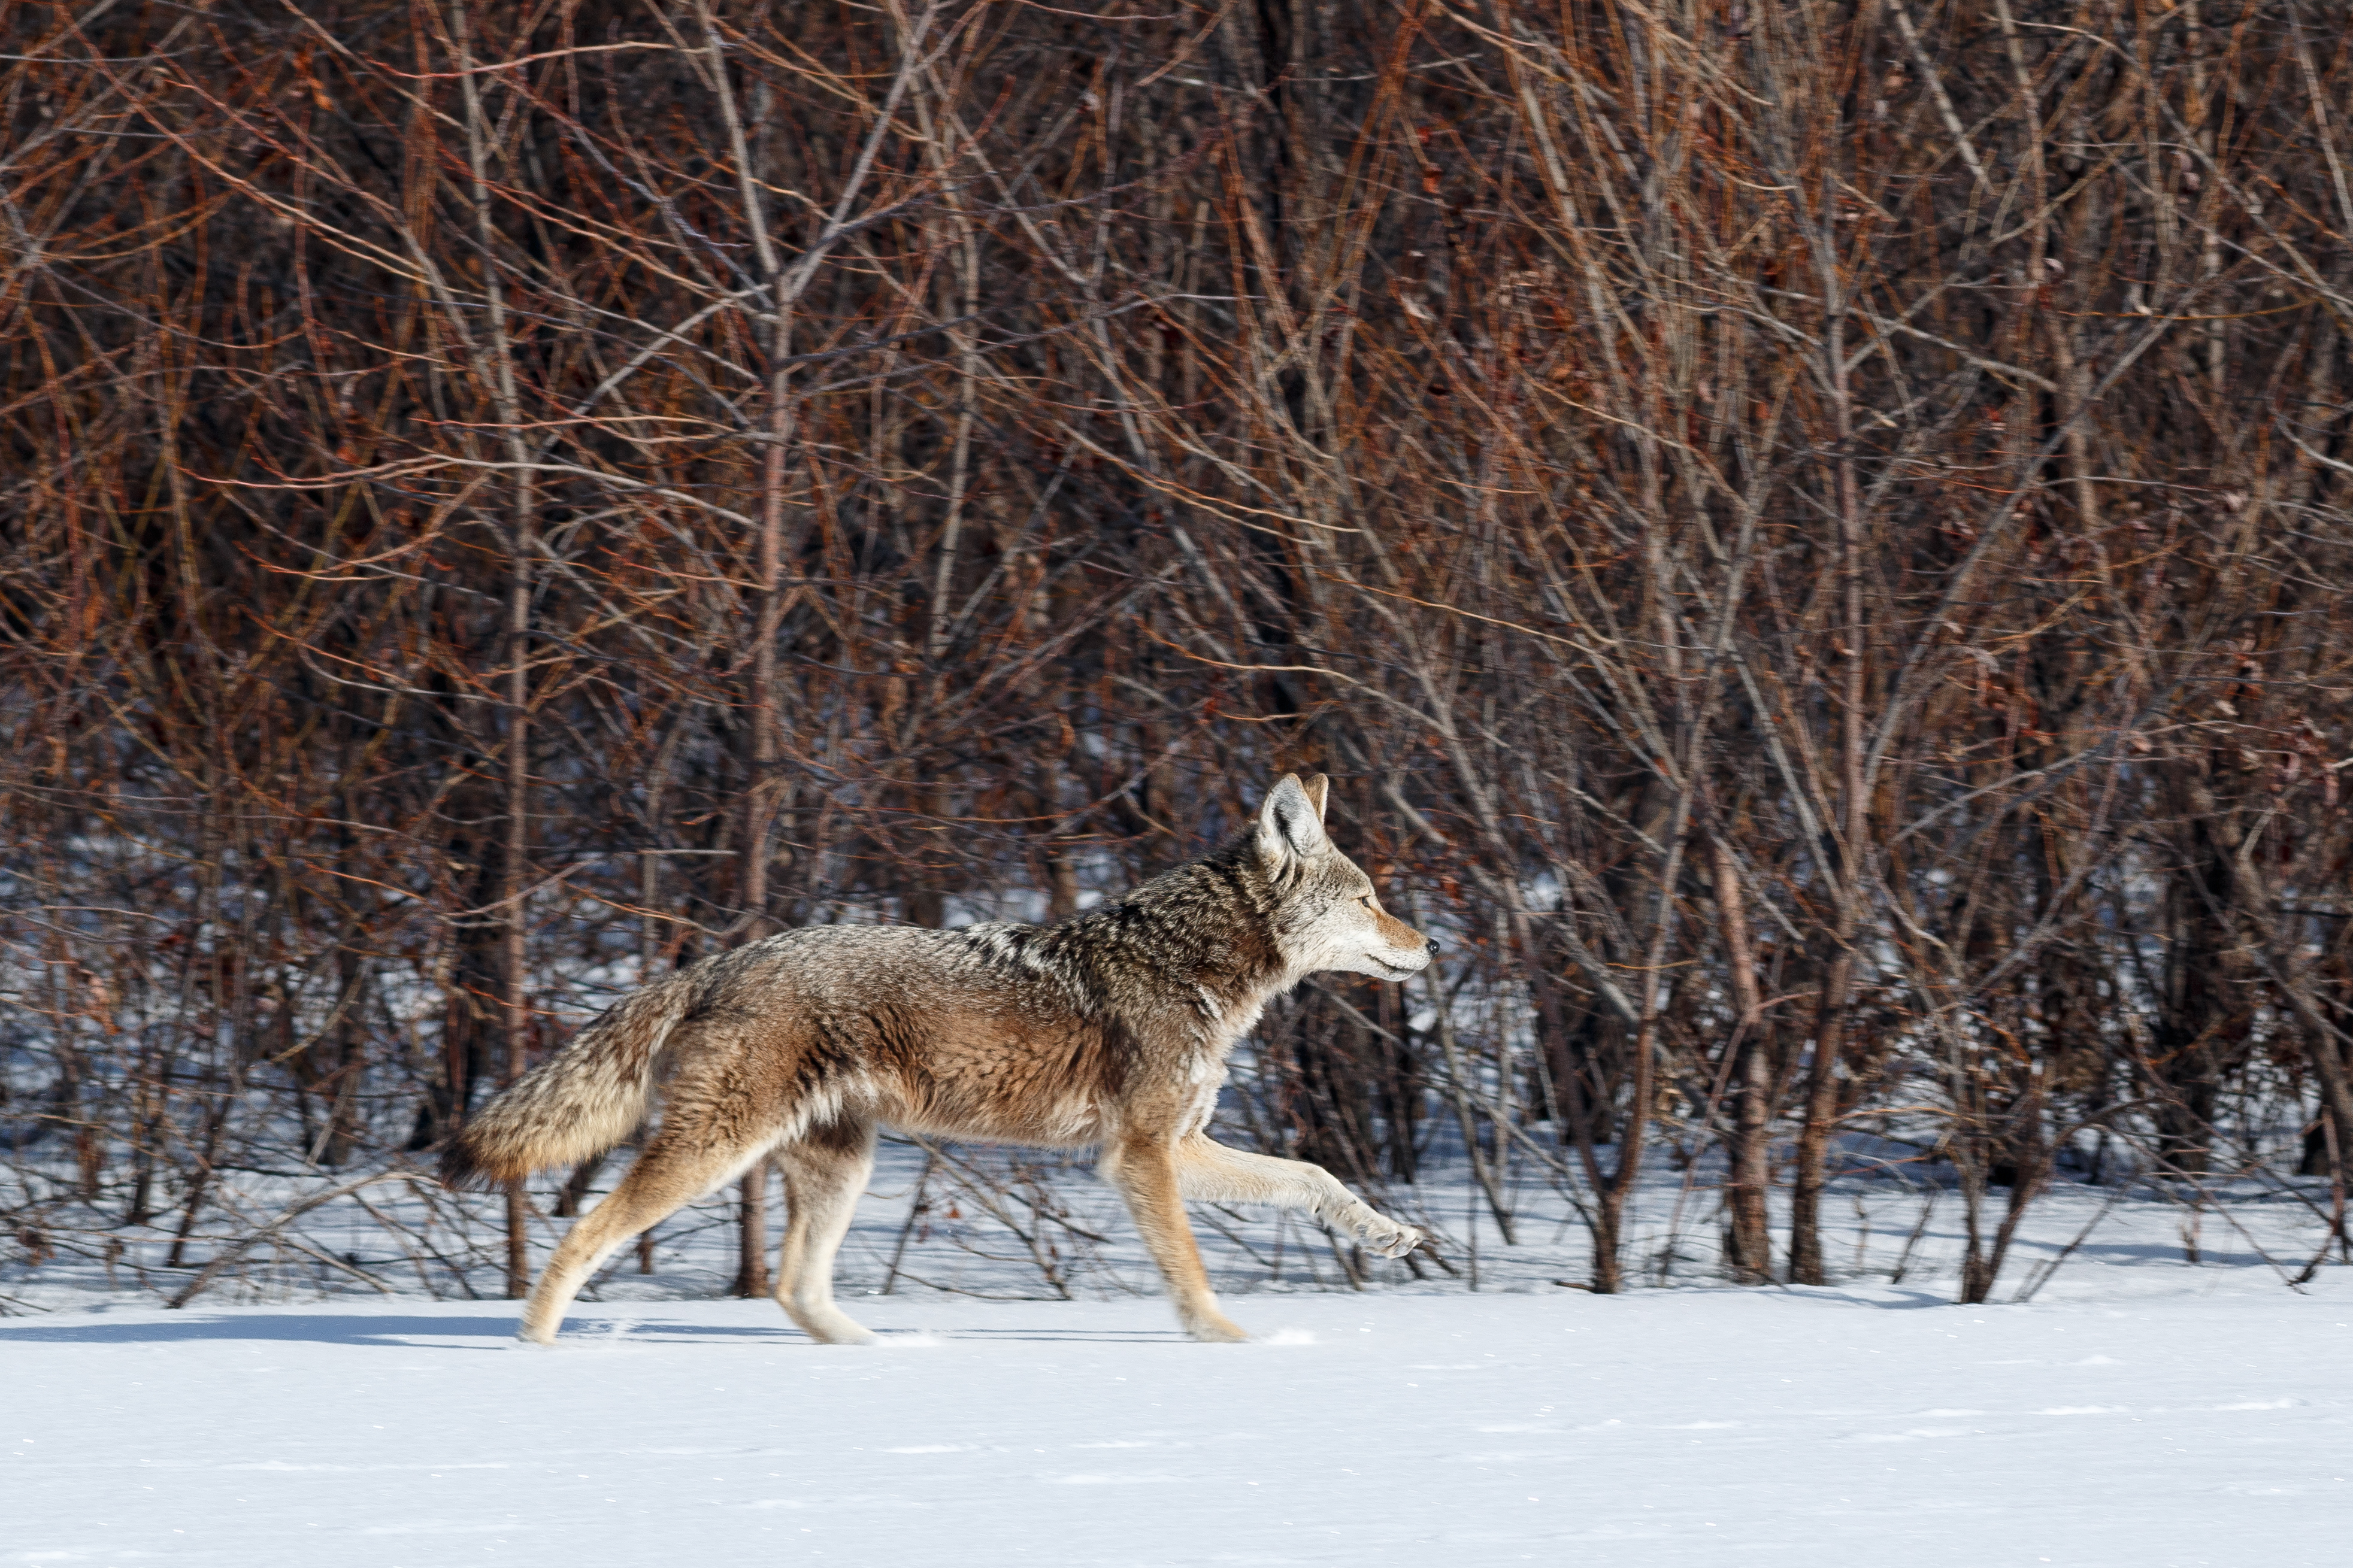 Coyote hunting in snow